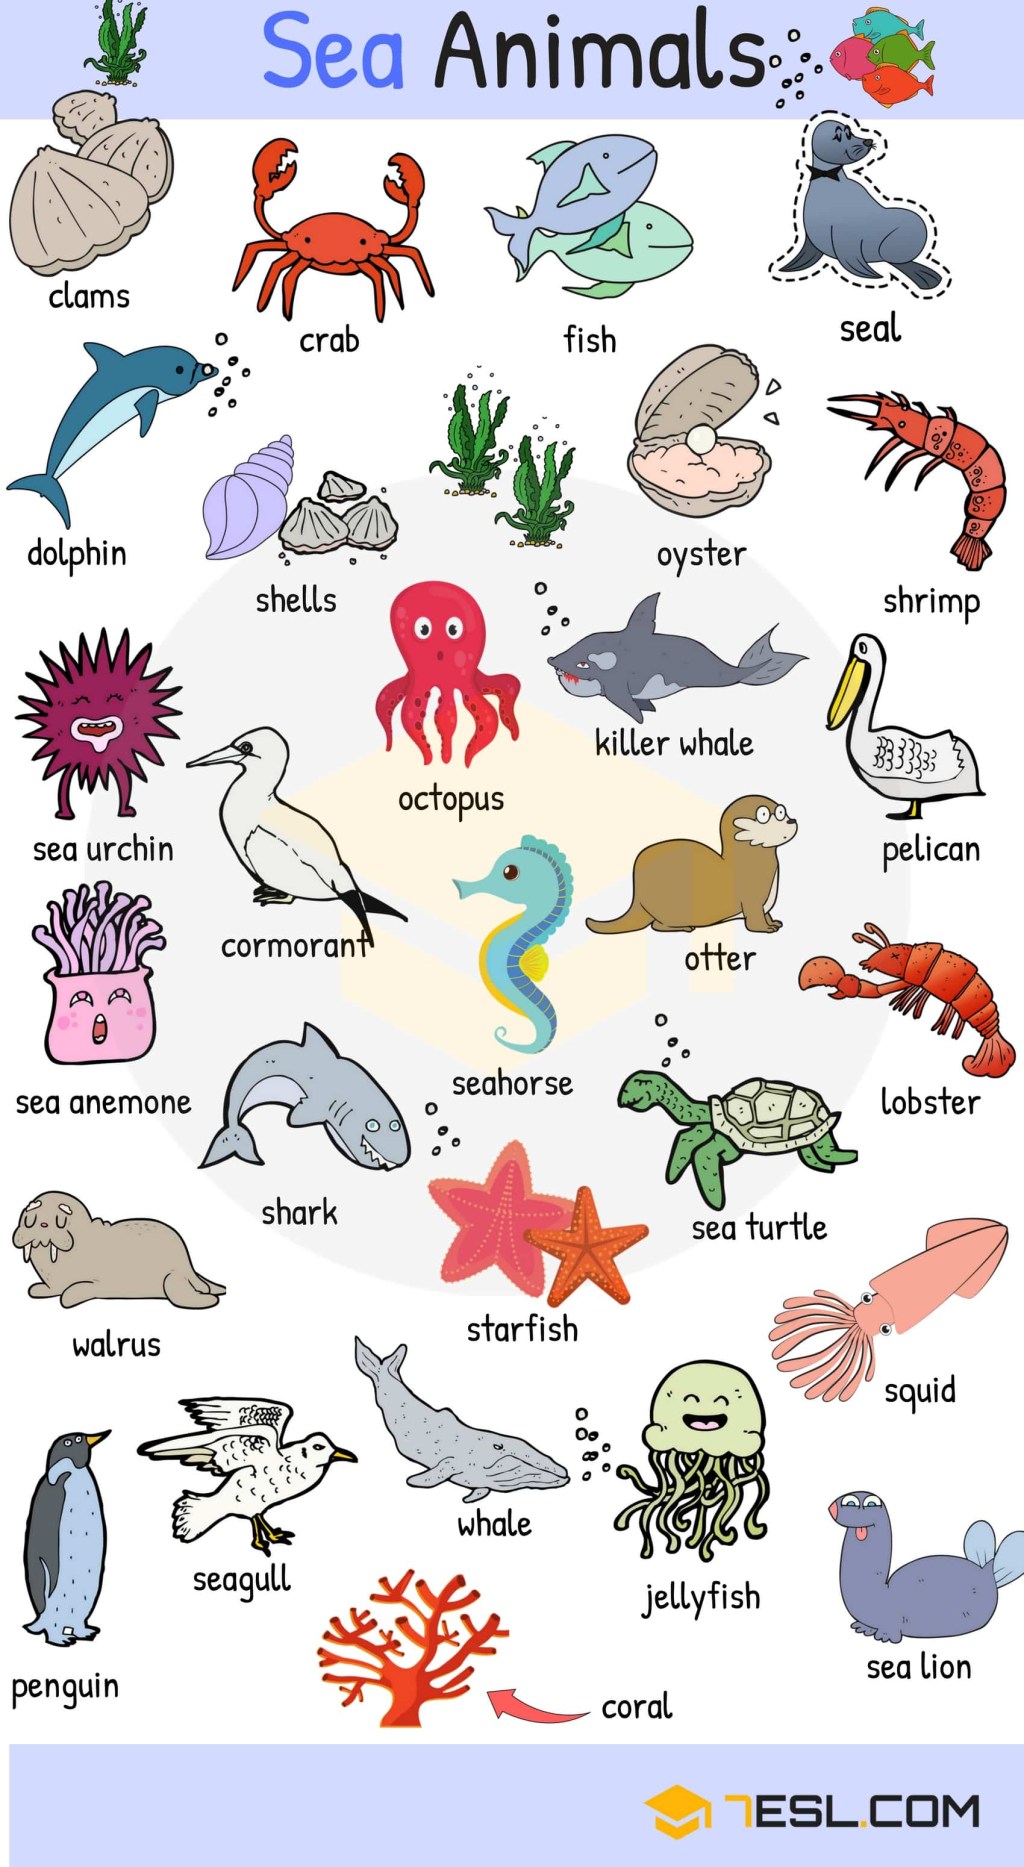 Picture of: Sea Animals: + Water, Ocean & Sea Animal Names with Images • ESL